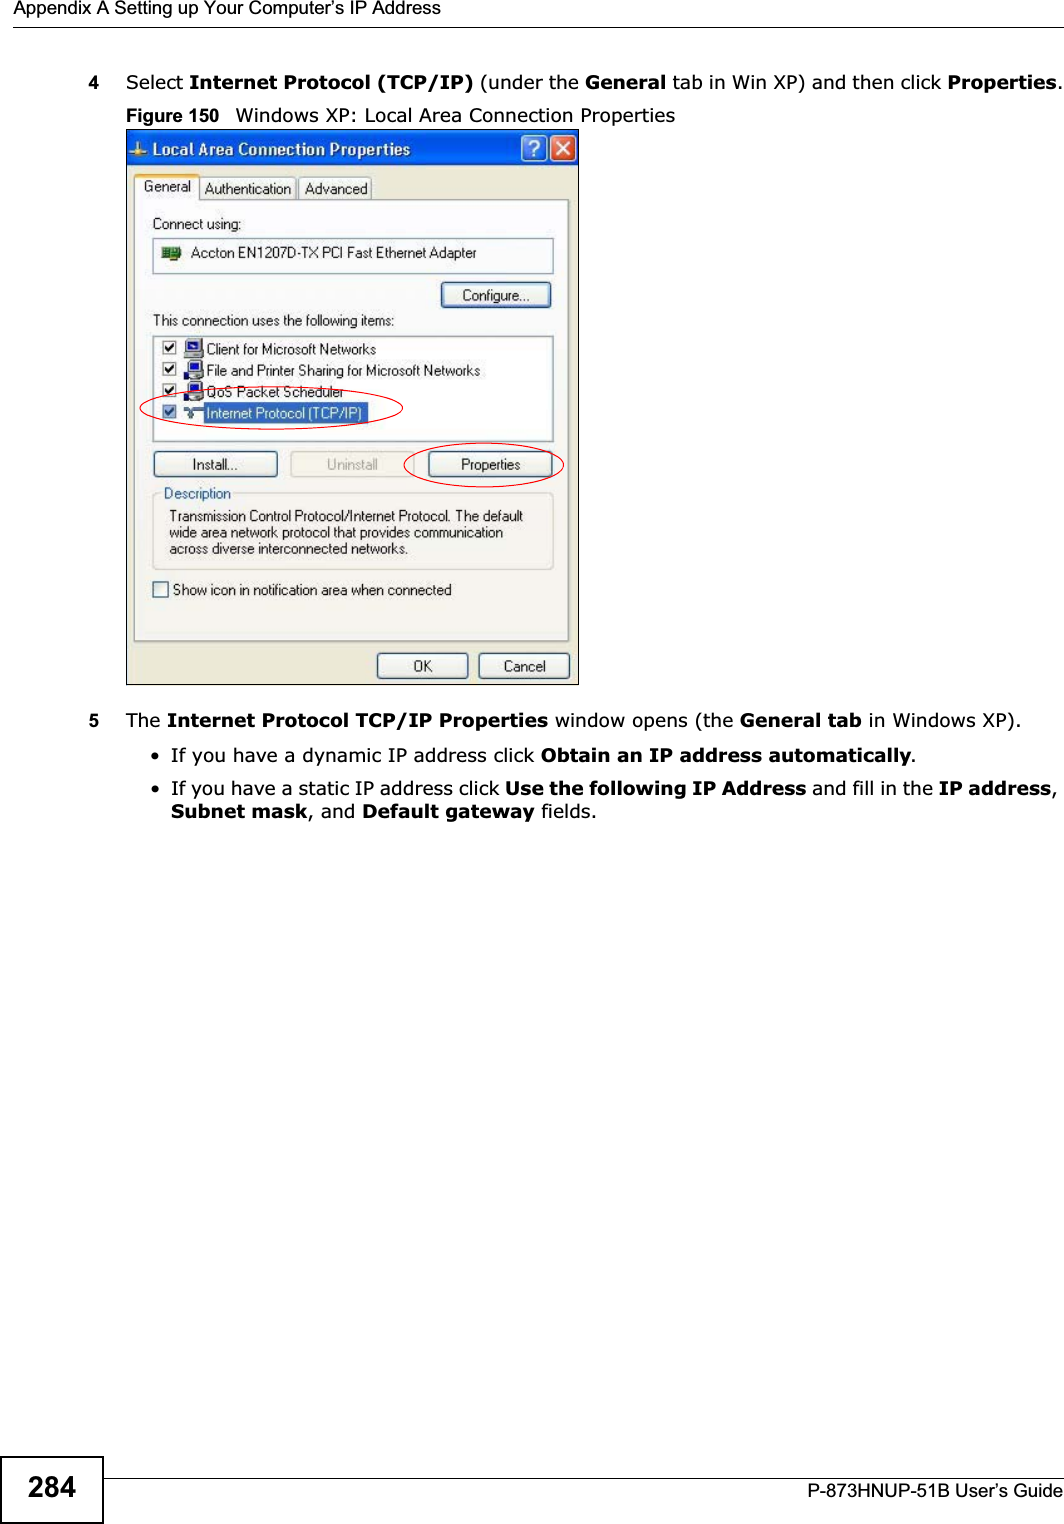 Appendix A Setting up Your Computer’s IP AddressP-873HNUP-51B User’s Guide2844Select Internet Protocol (TCP/IP) (under the General tab in Win XP) and then click Properties.Figure 150   Windows XP: Local Area Connection Properties5The Internet Protocol TCP/IP Properties window opens (the General tab in Windows XP).• If you have a dynamic IP address click Obtain an IP address automatically.• If you have a static IP address click Use the following IP Address and fill in the IP address,Subnet mask, and Default gateway fields. 